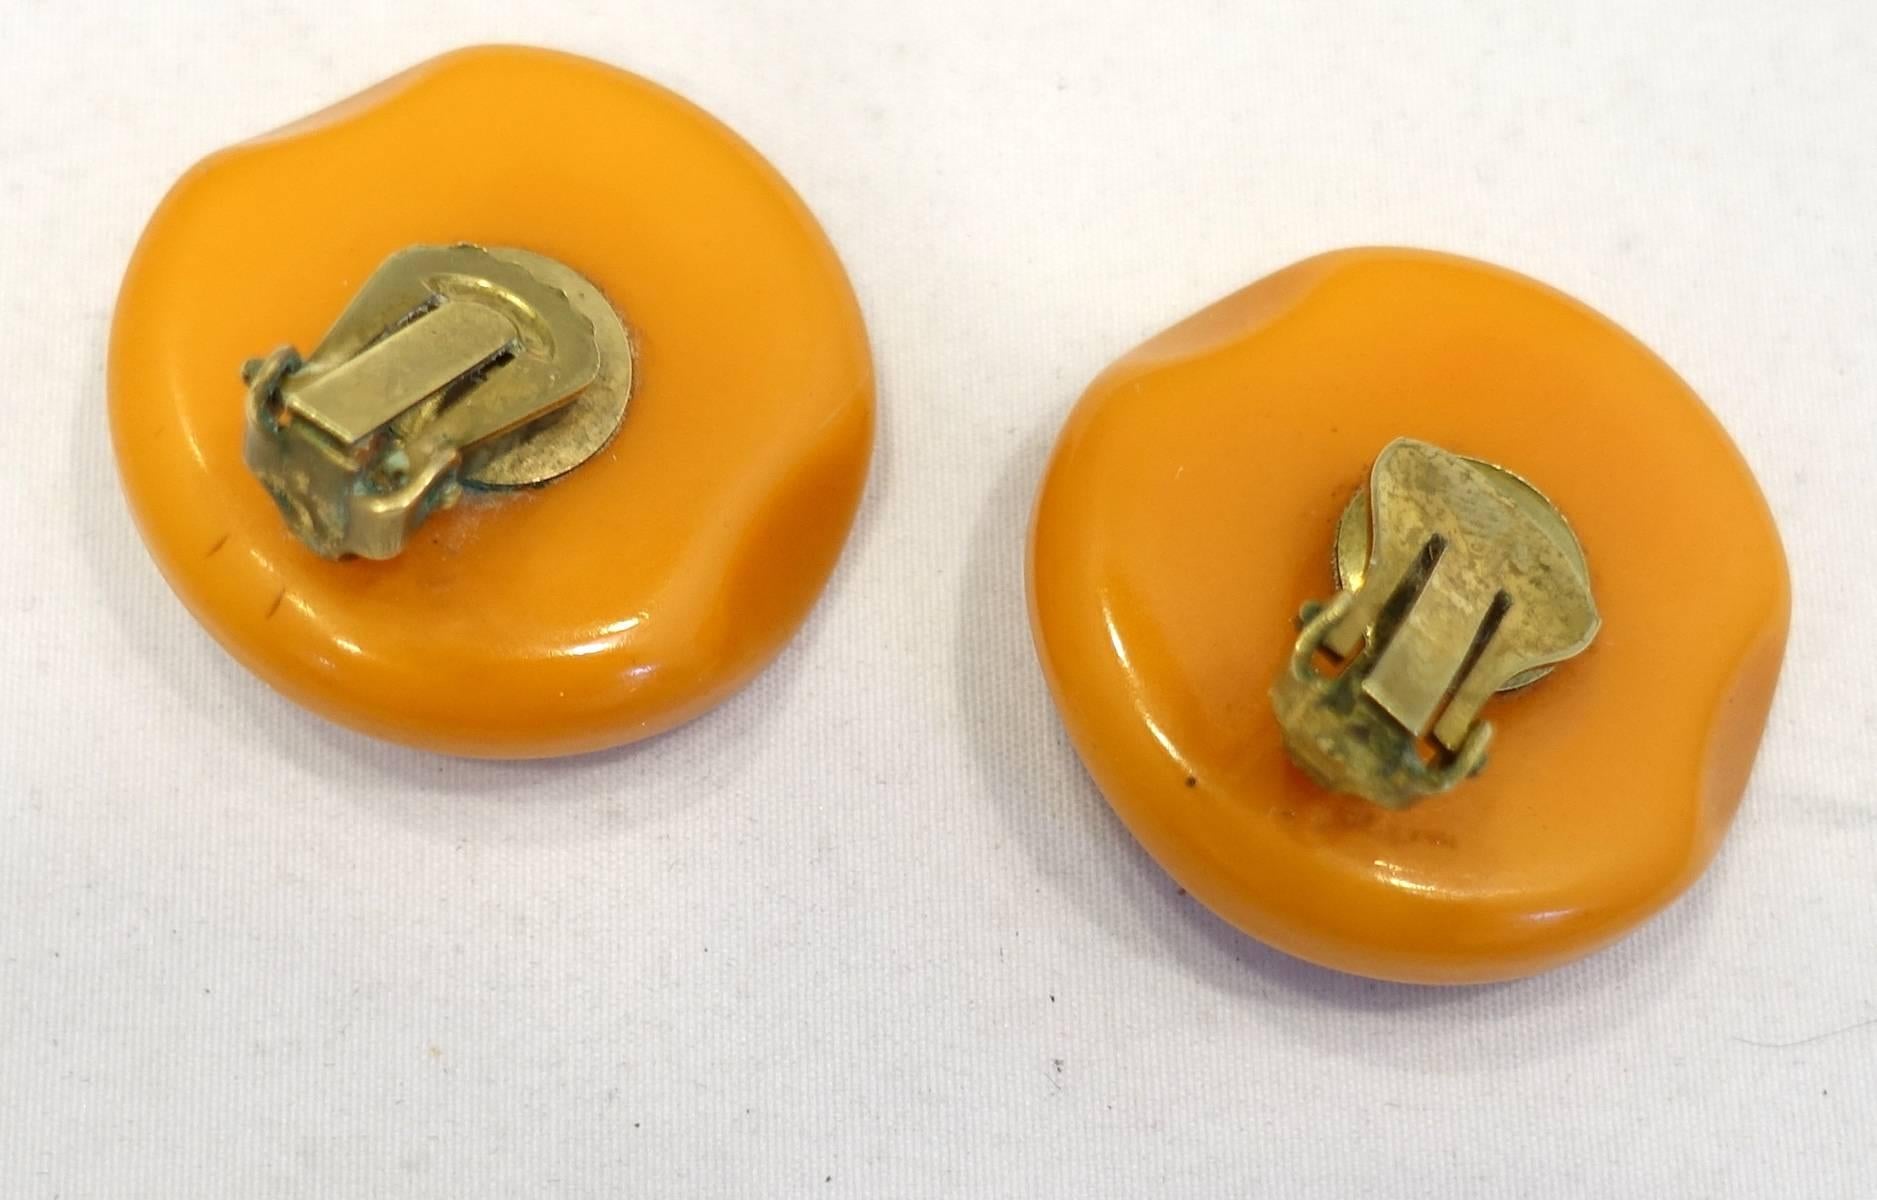 These vintage round 1930s earrings is made of butterscotch Bakelite with a gold-tone setting. These clip earrings measure 1-1/4” and are in excellent condition.